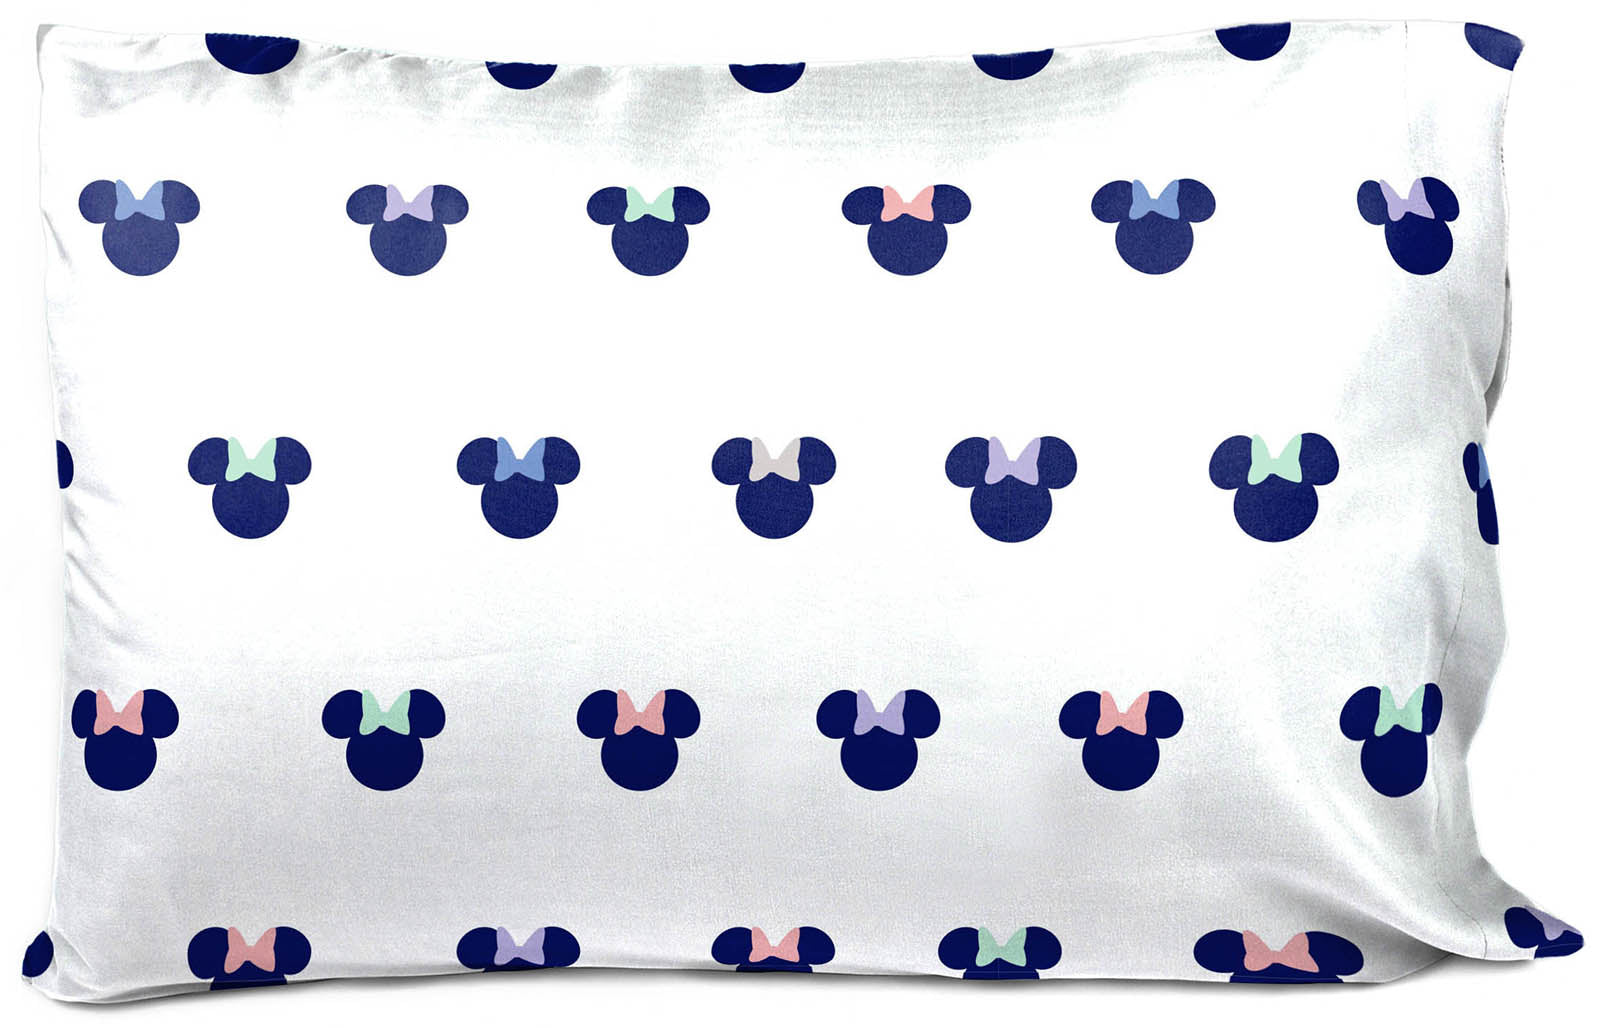 Saturday Park Disney Minnie Mouse Dreaming of Dots 100% Organic Cotton Pillowcase